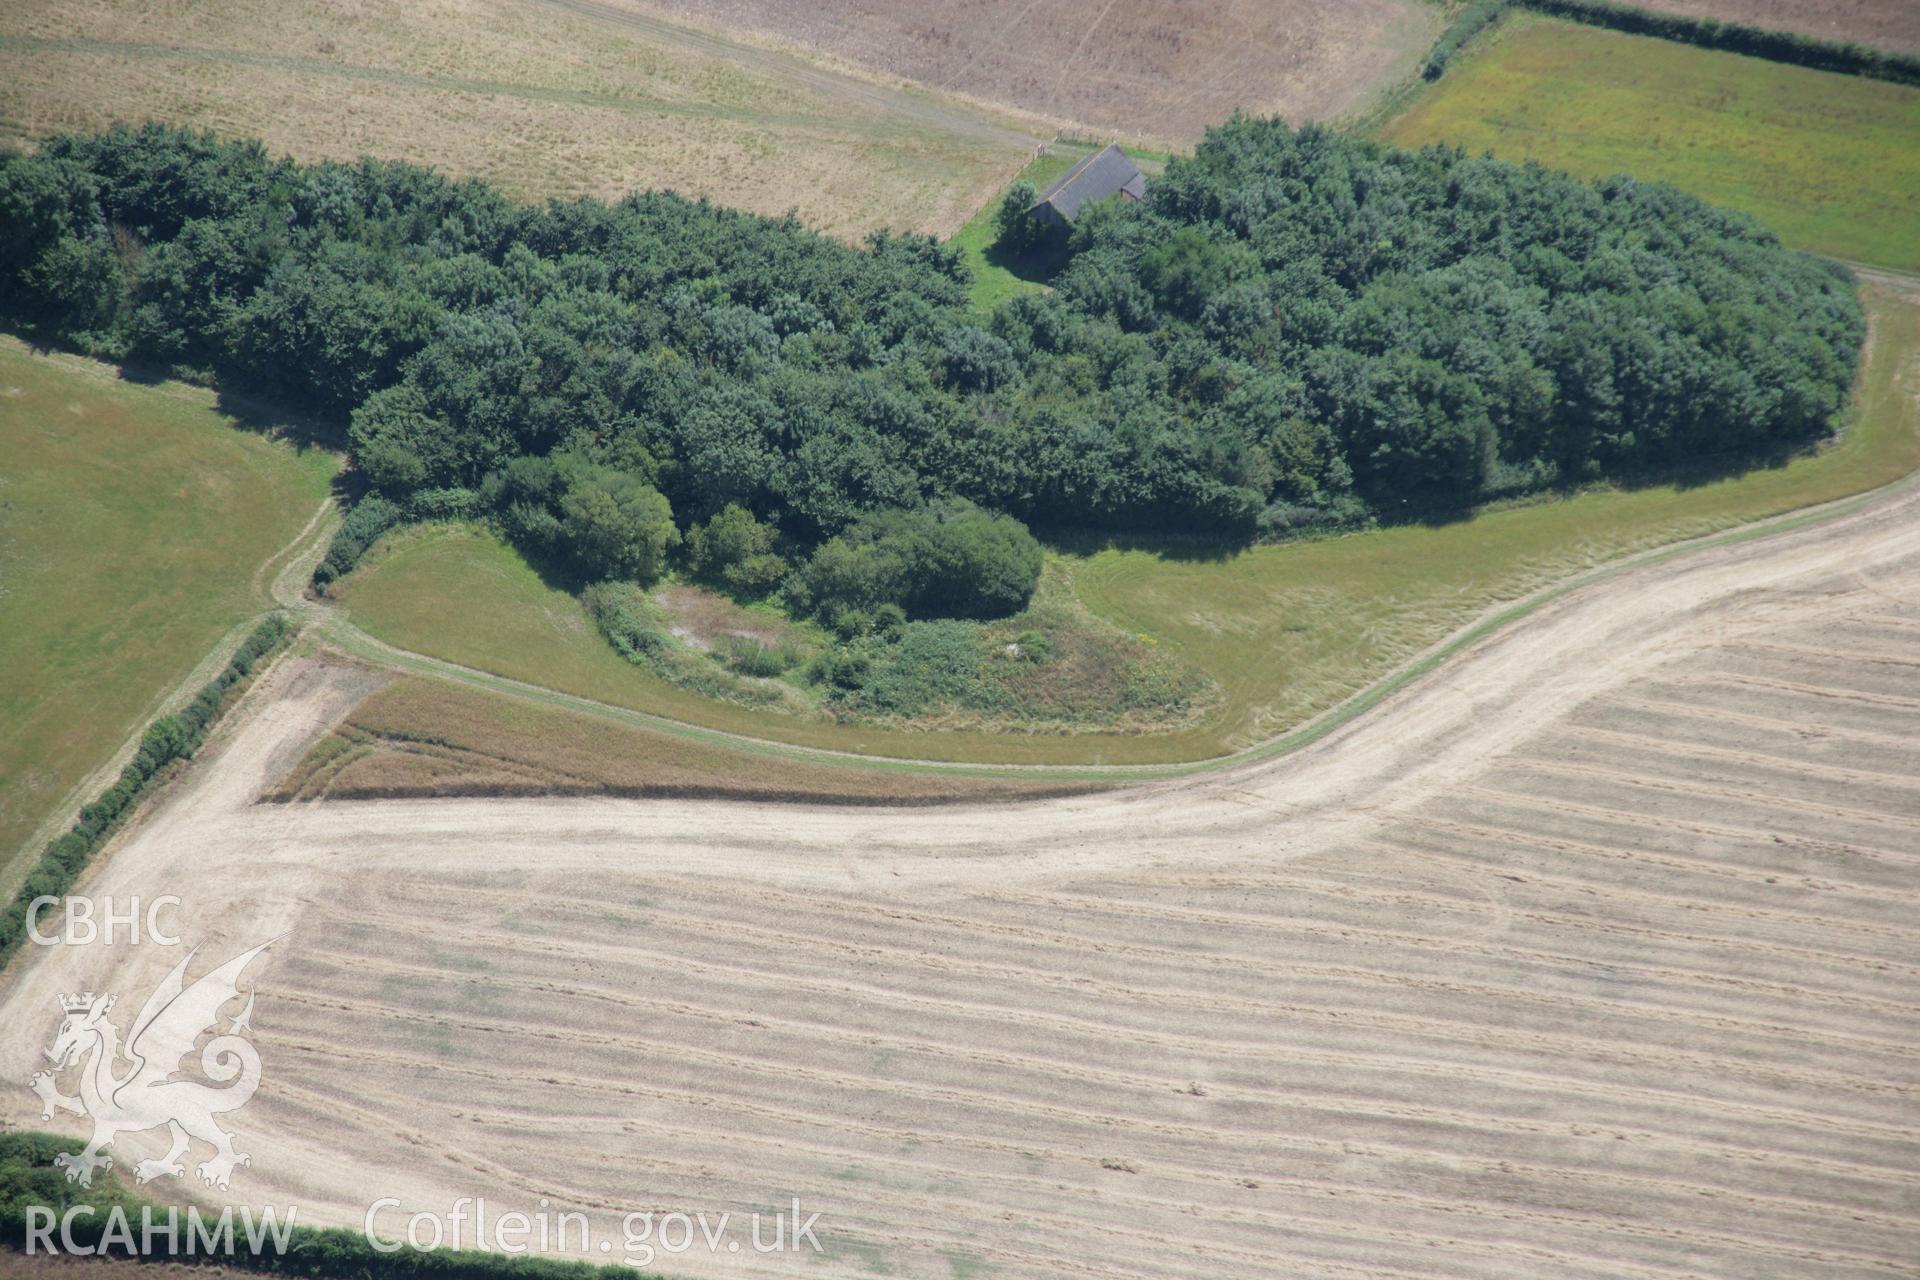 RCAHMW colour oblique aerial photograph of Tythegston Long Barrow. Taken on 24 July 2006 by Toby Driver.